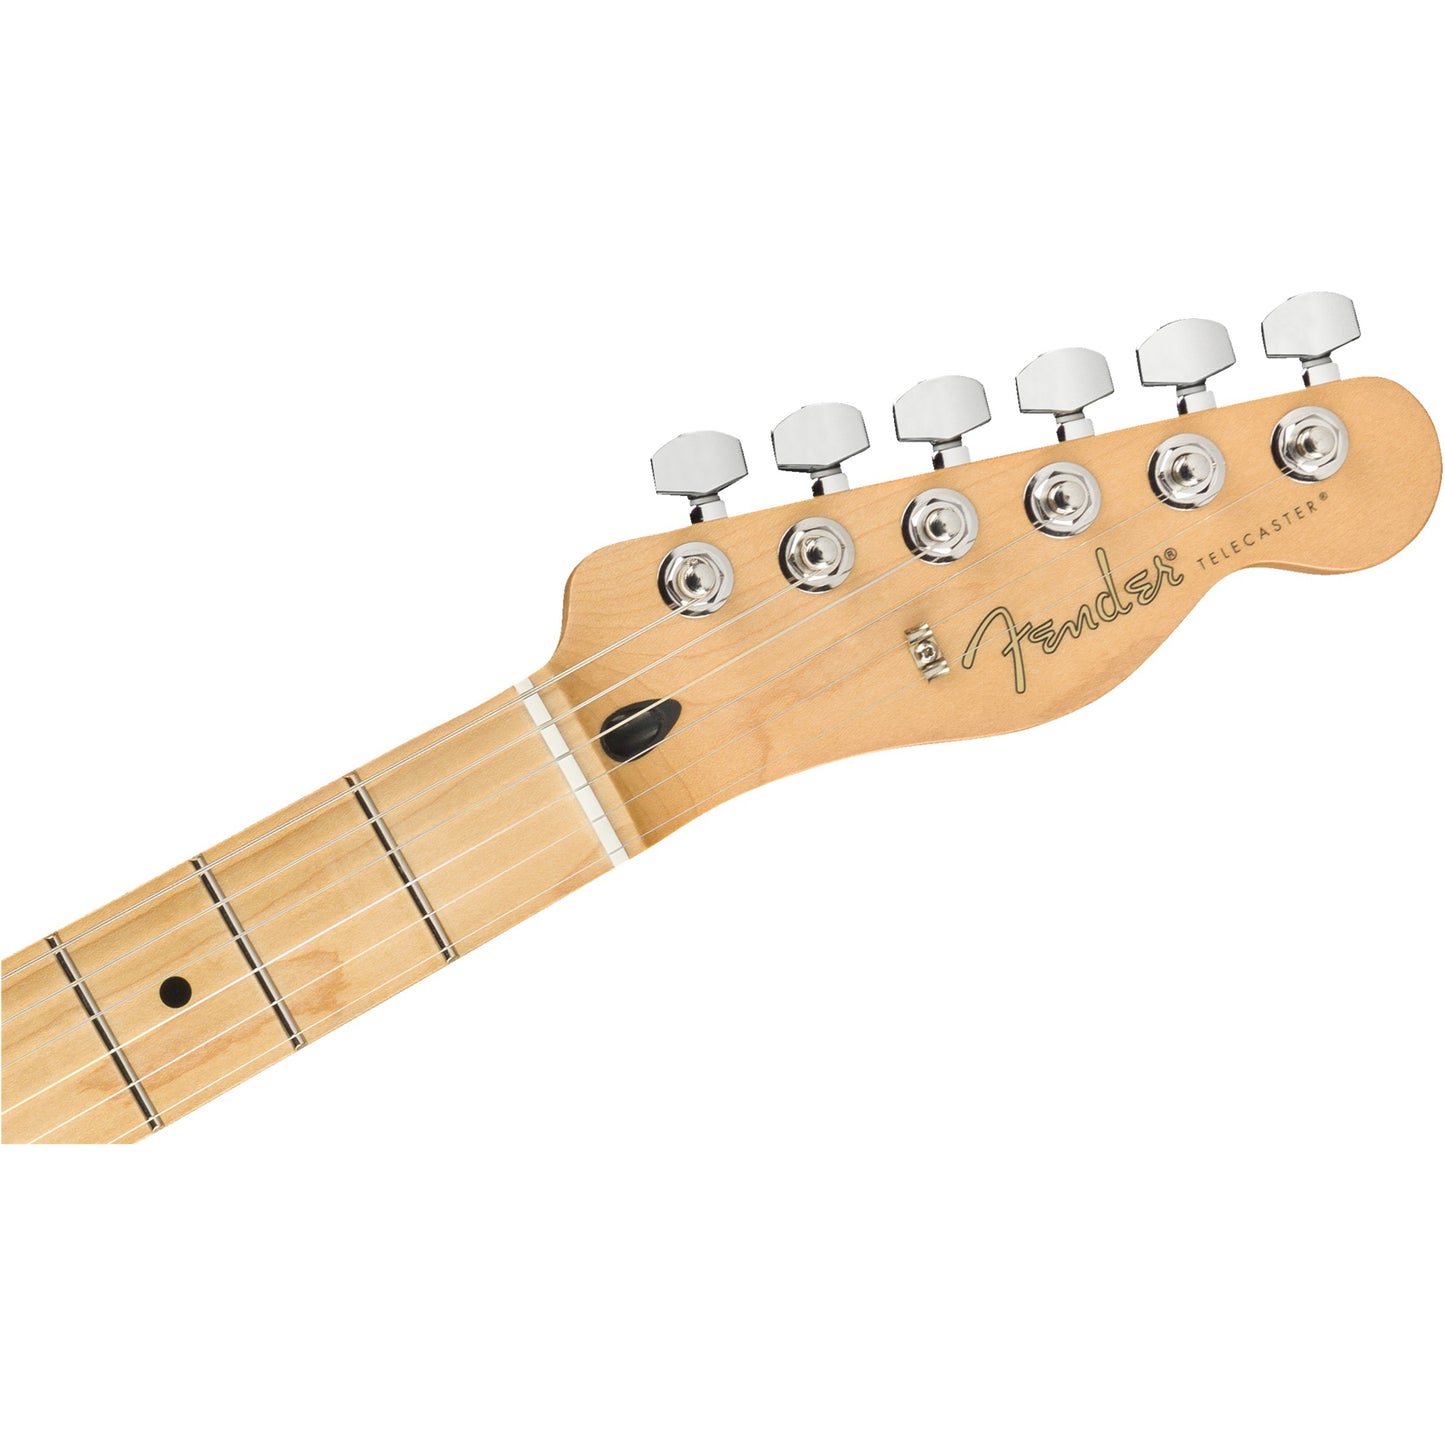 Fender Player Telecaster® Electric Guitar, Tidepool